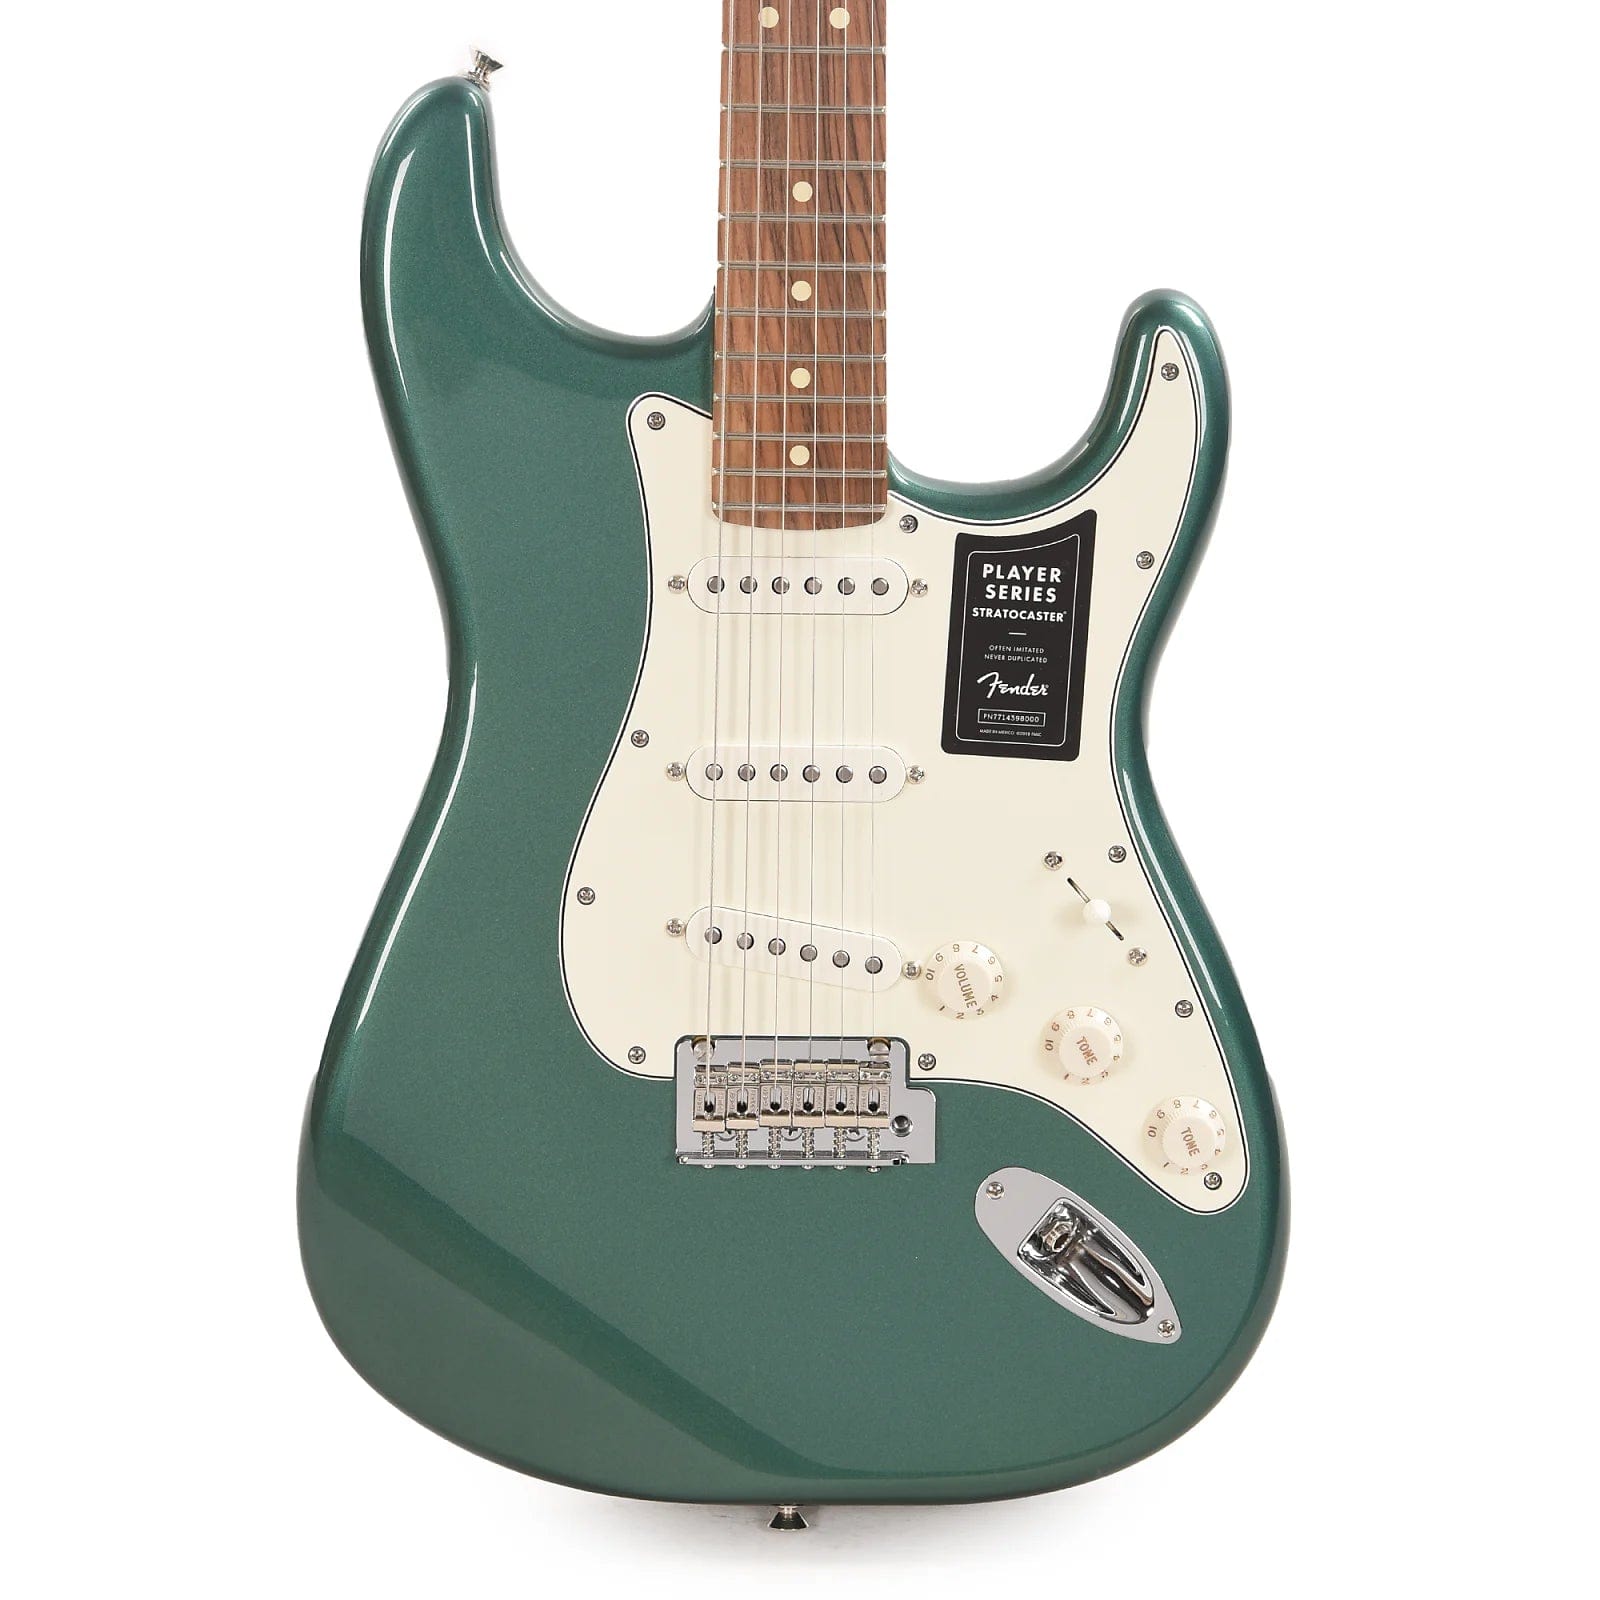 Fender Player Stratocaster Sherwood Green Metallic w/3-Ply Parchment Pickguard Electric Guitars / Solid Body